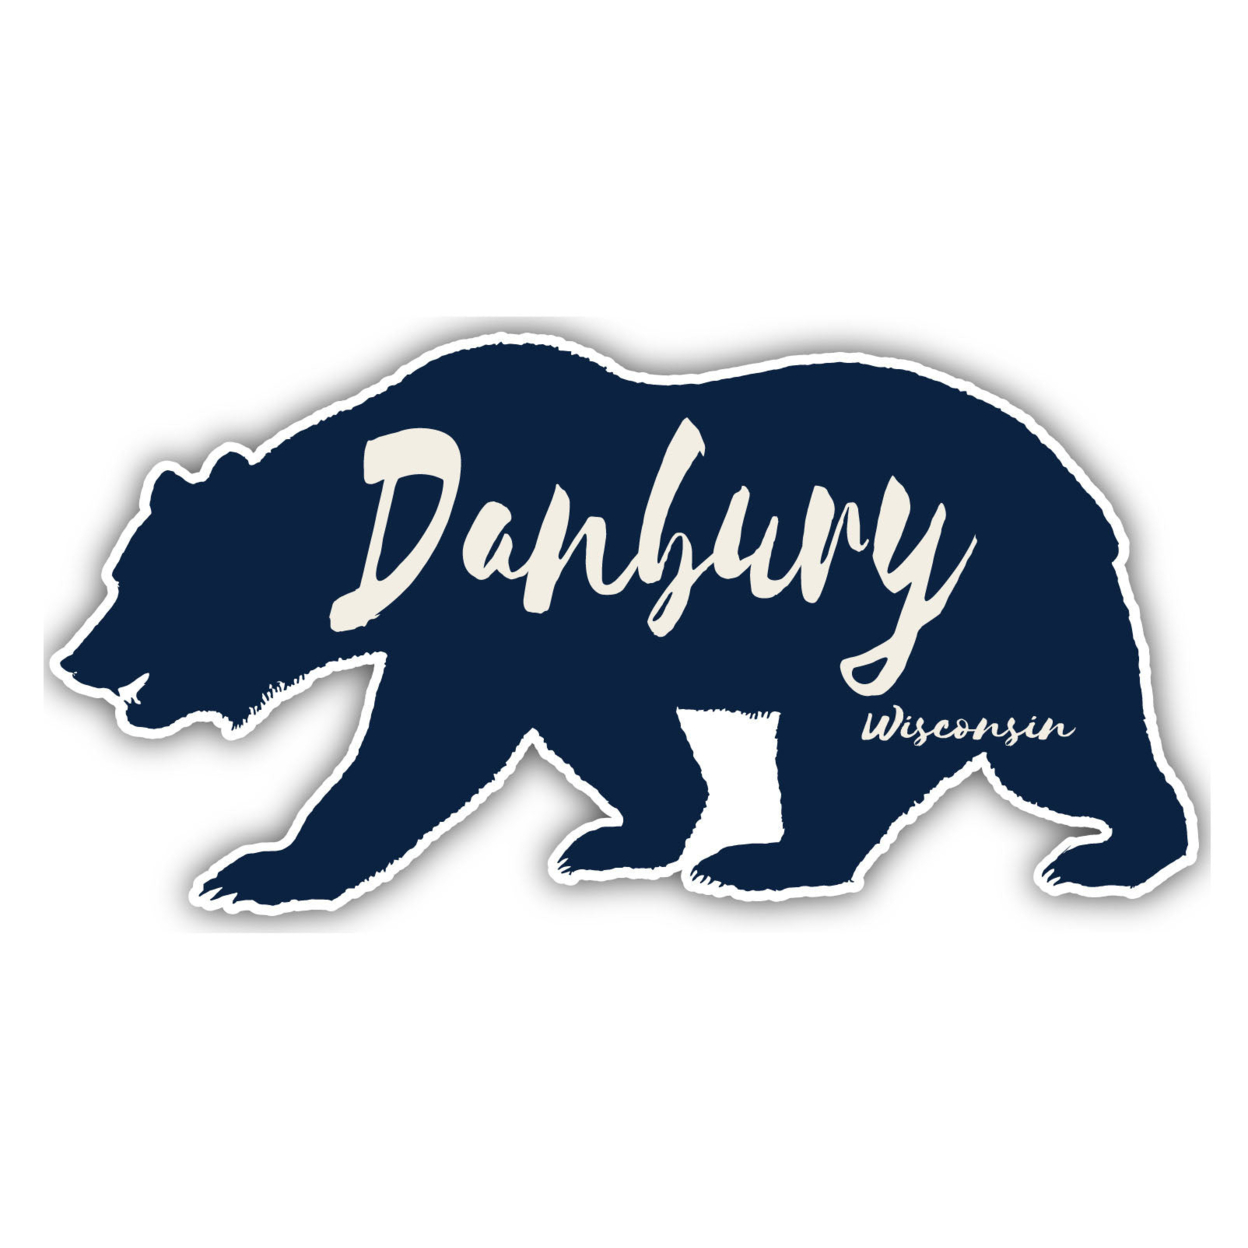 Danbury Wisconsin Souvenir Decorative Stickers (Choose Theme And Size) - Single Unit, 12-Inch, Great Outdoors